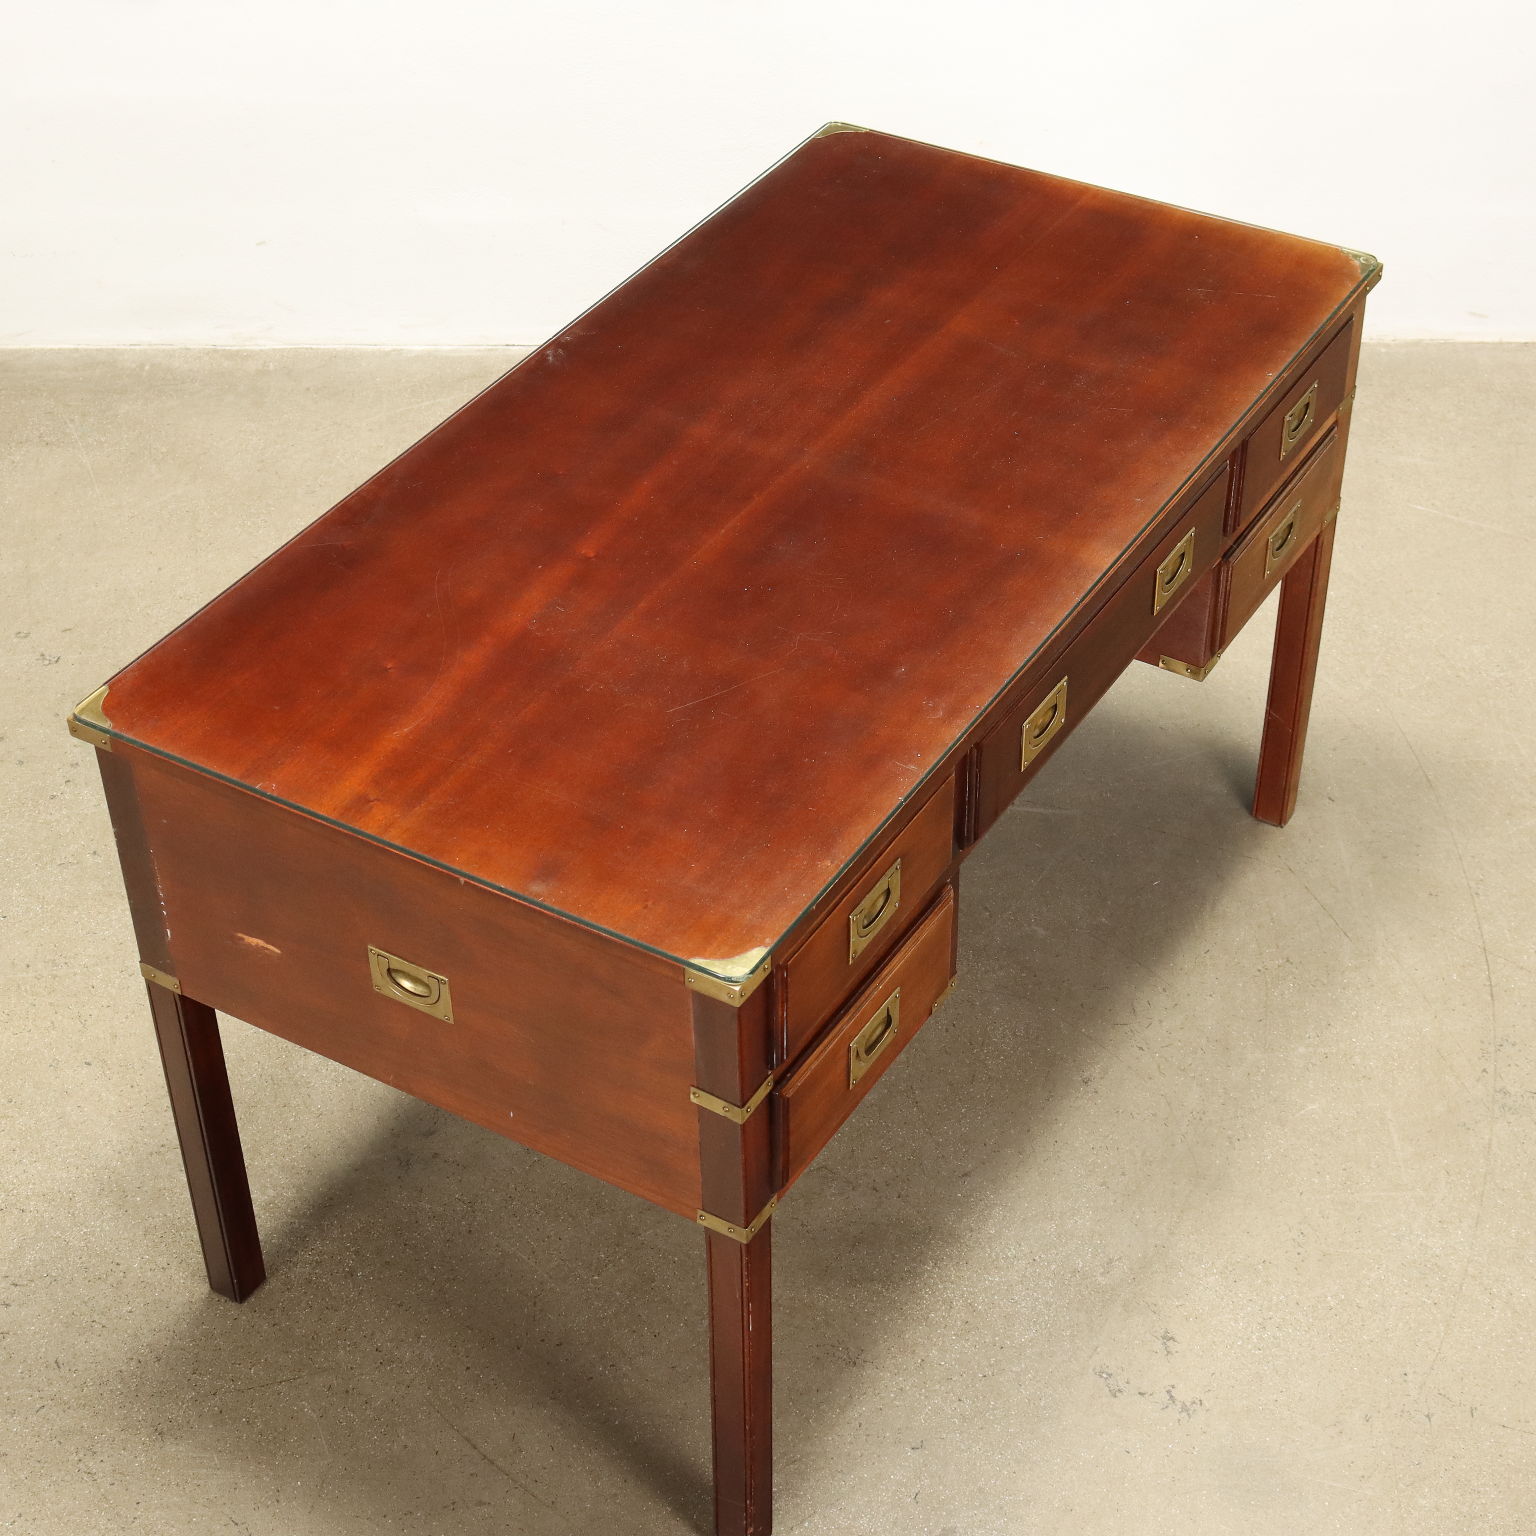 Large English Navy Writing Desk in Mahogany and Brass for sale at Pamono